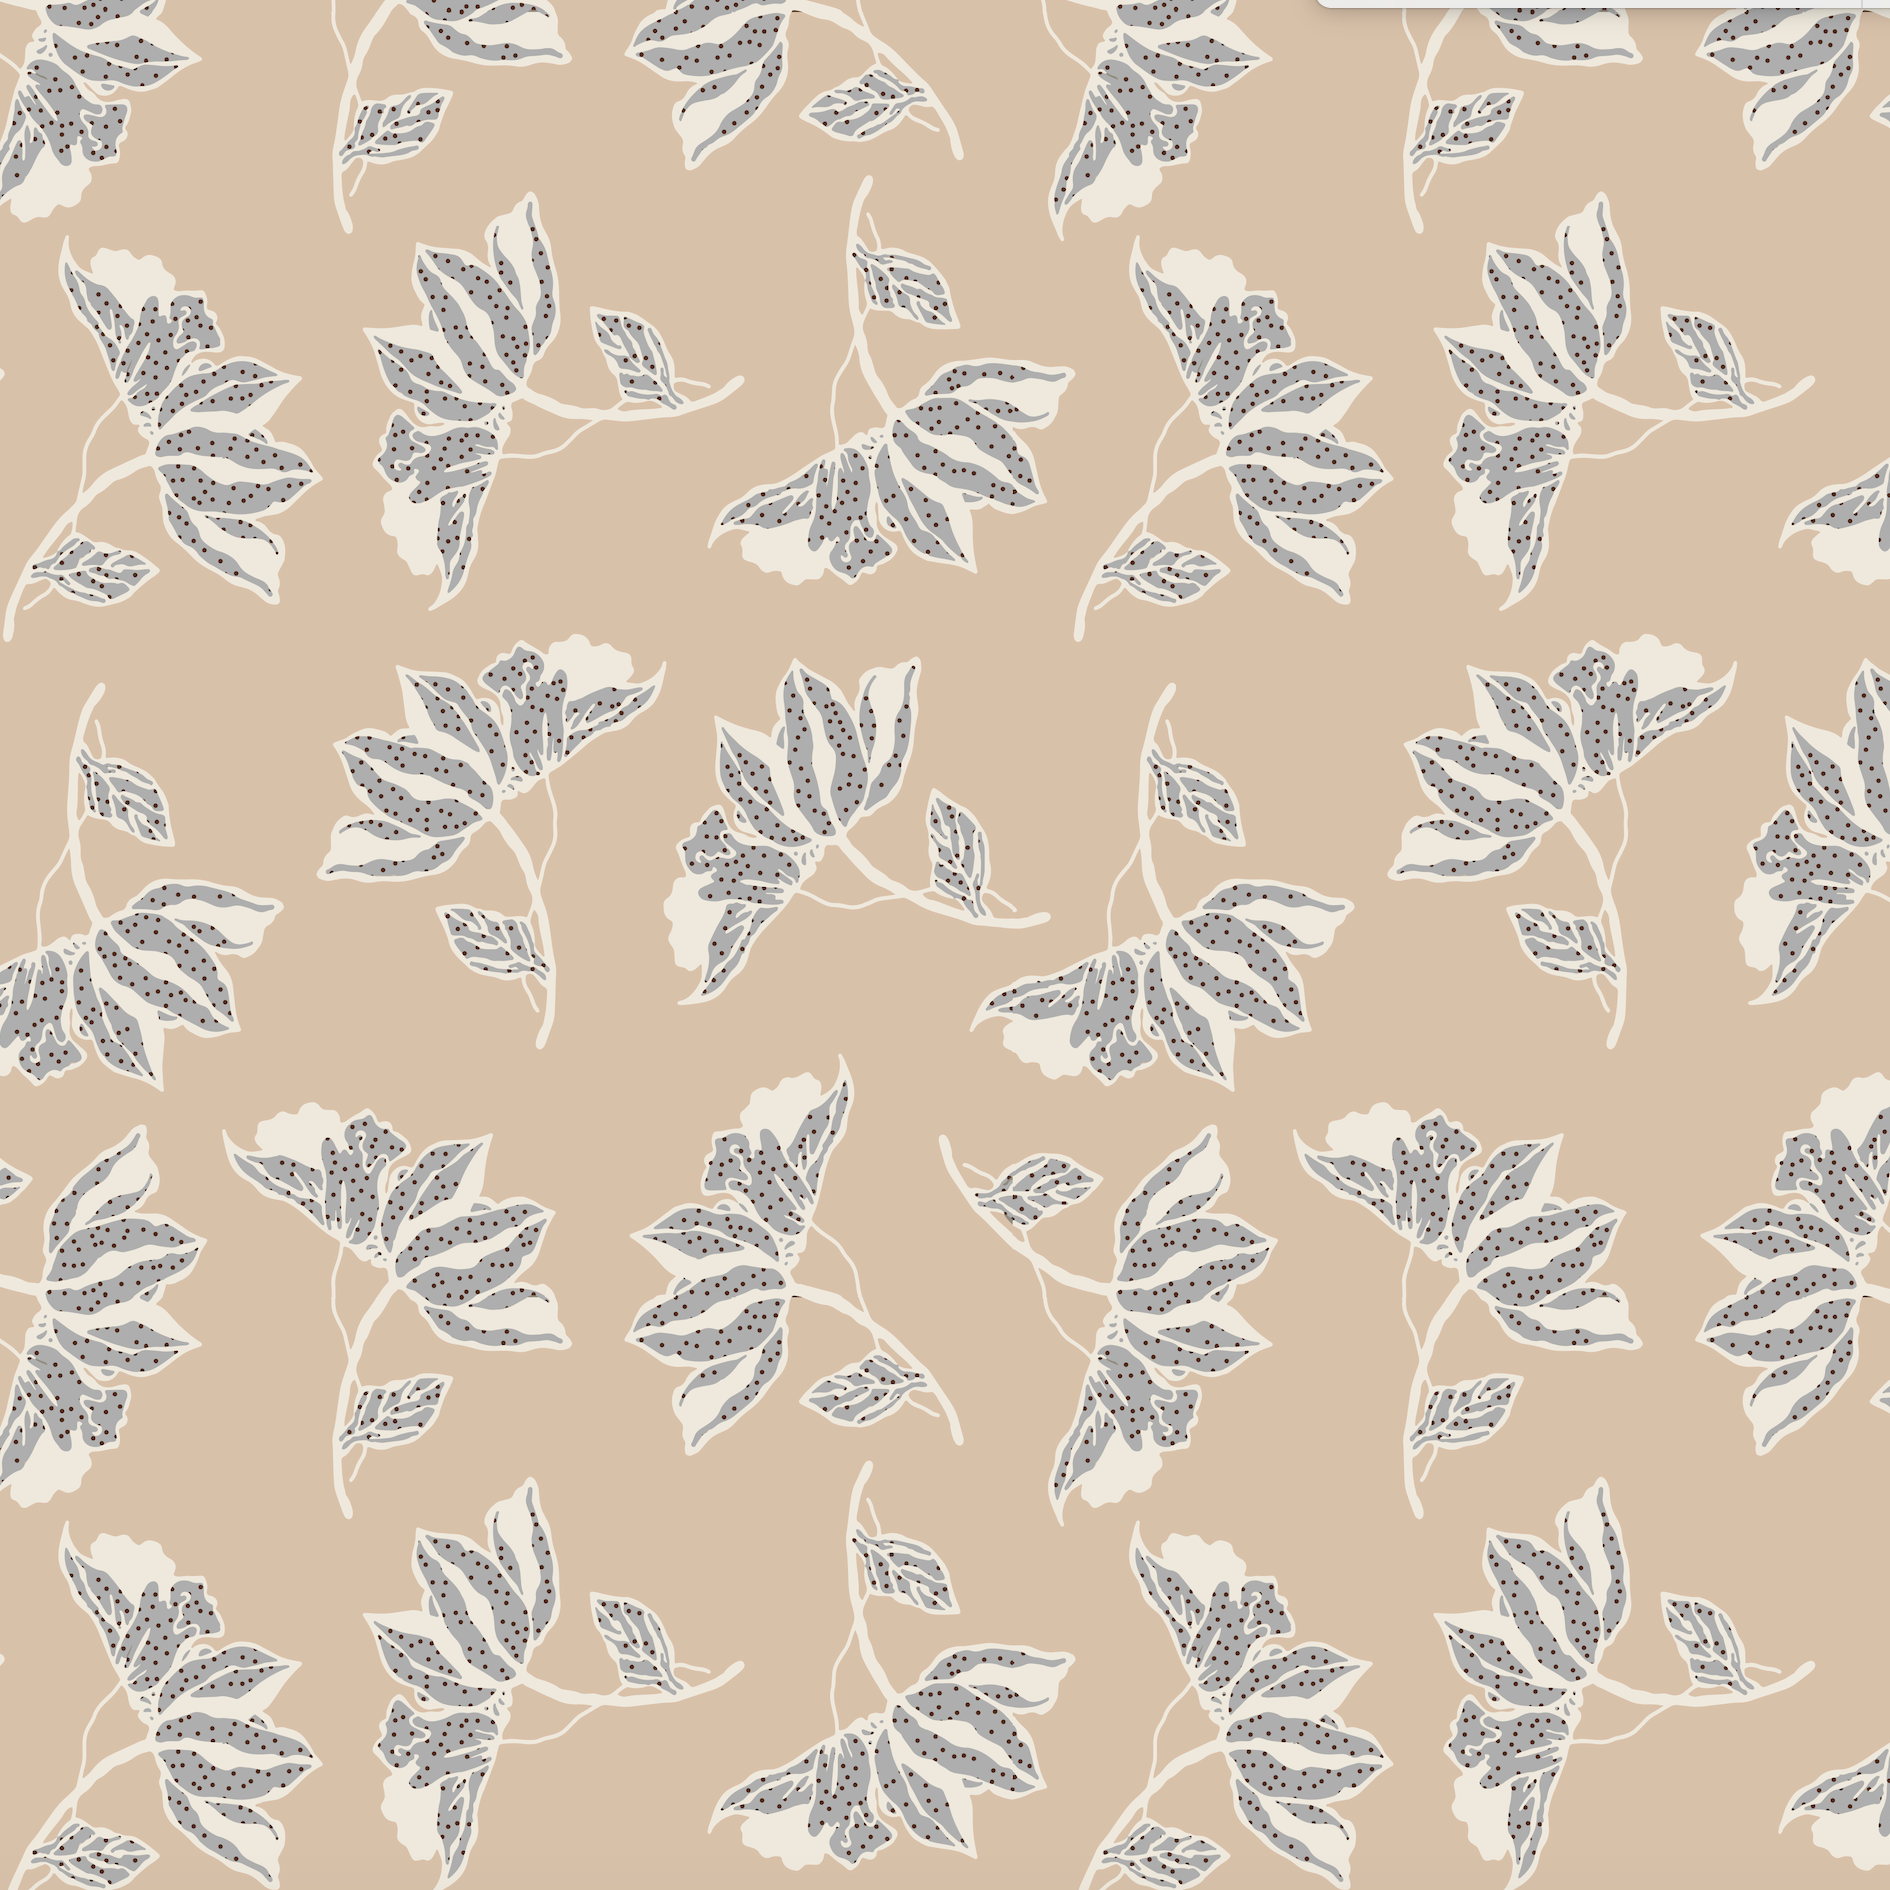 Leah Wallpaper by Wall Blush with elegant leaf pattern for enhancing living room decor focus.
